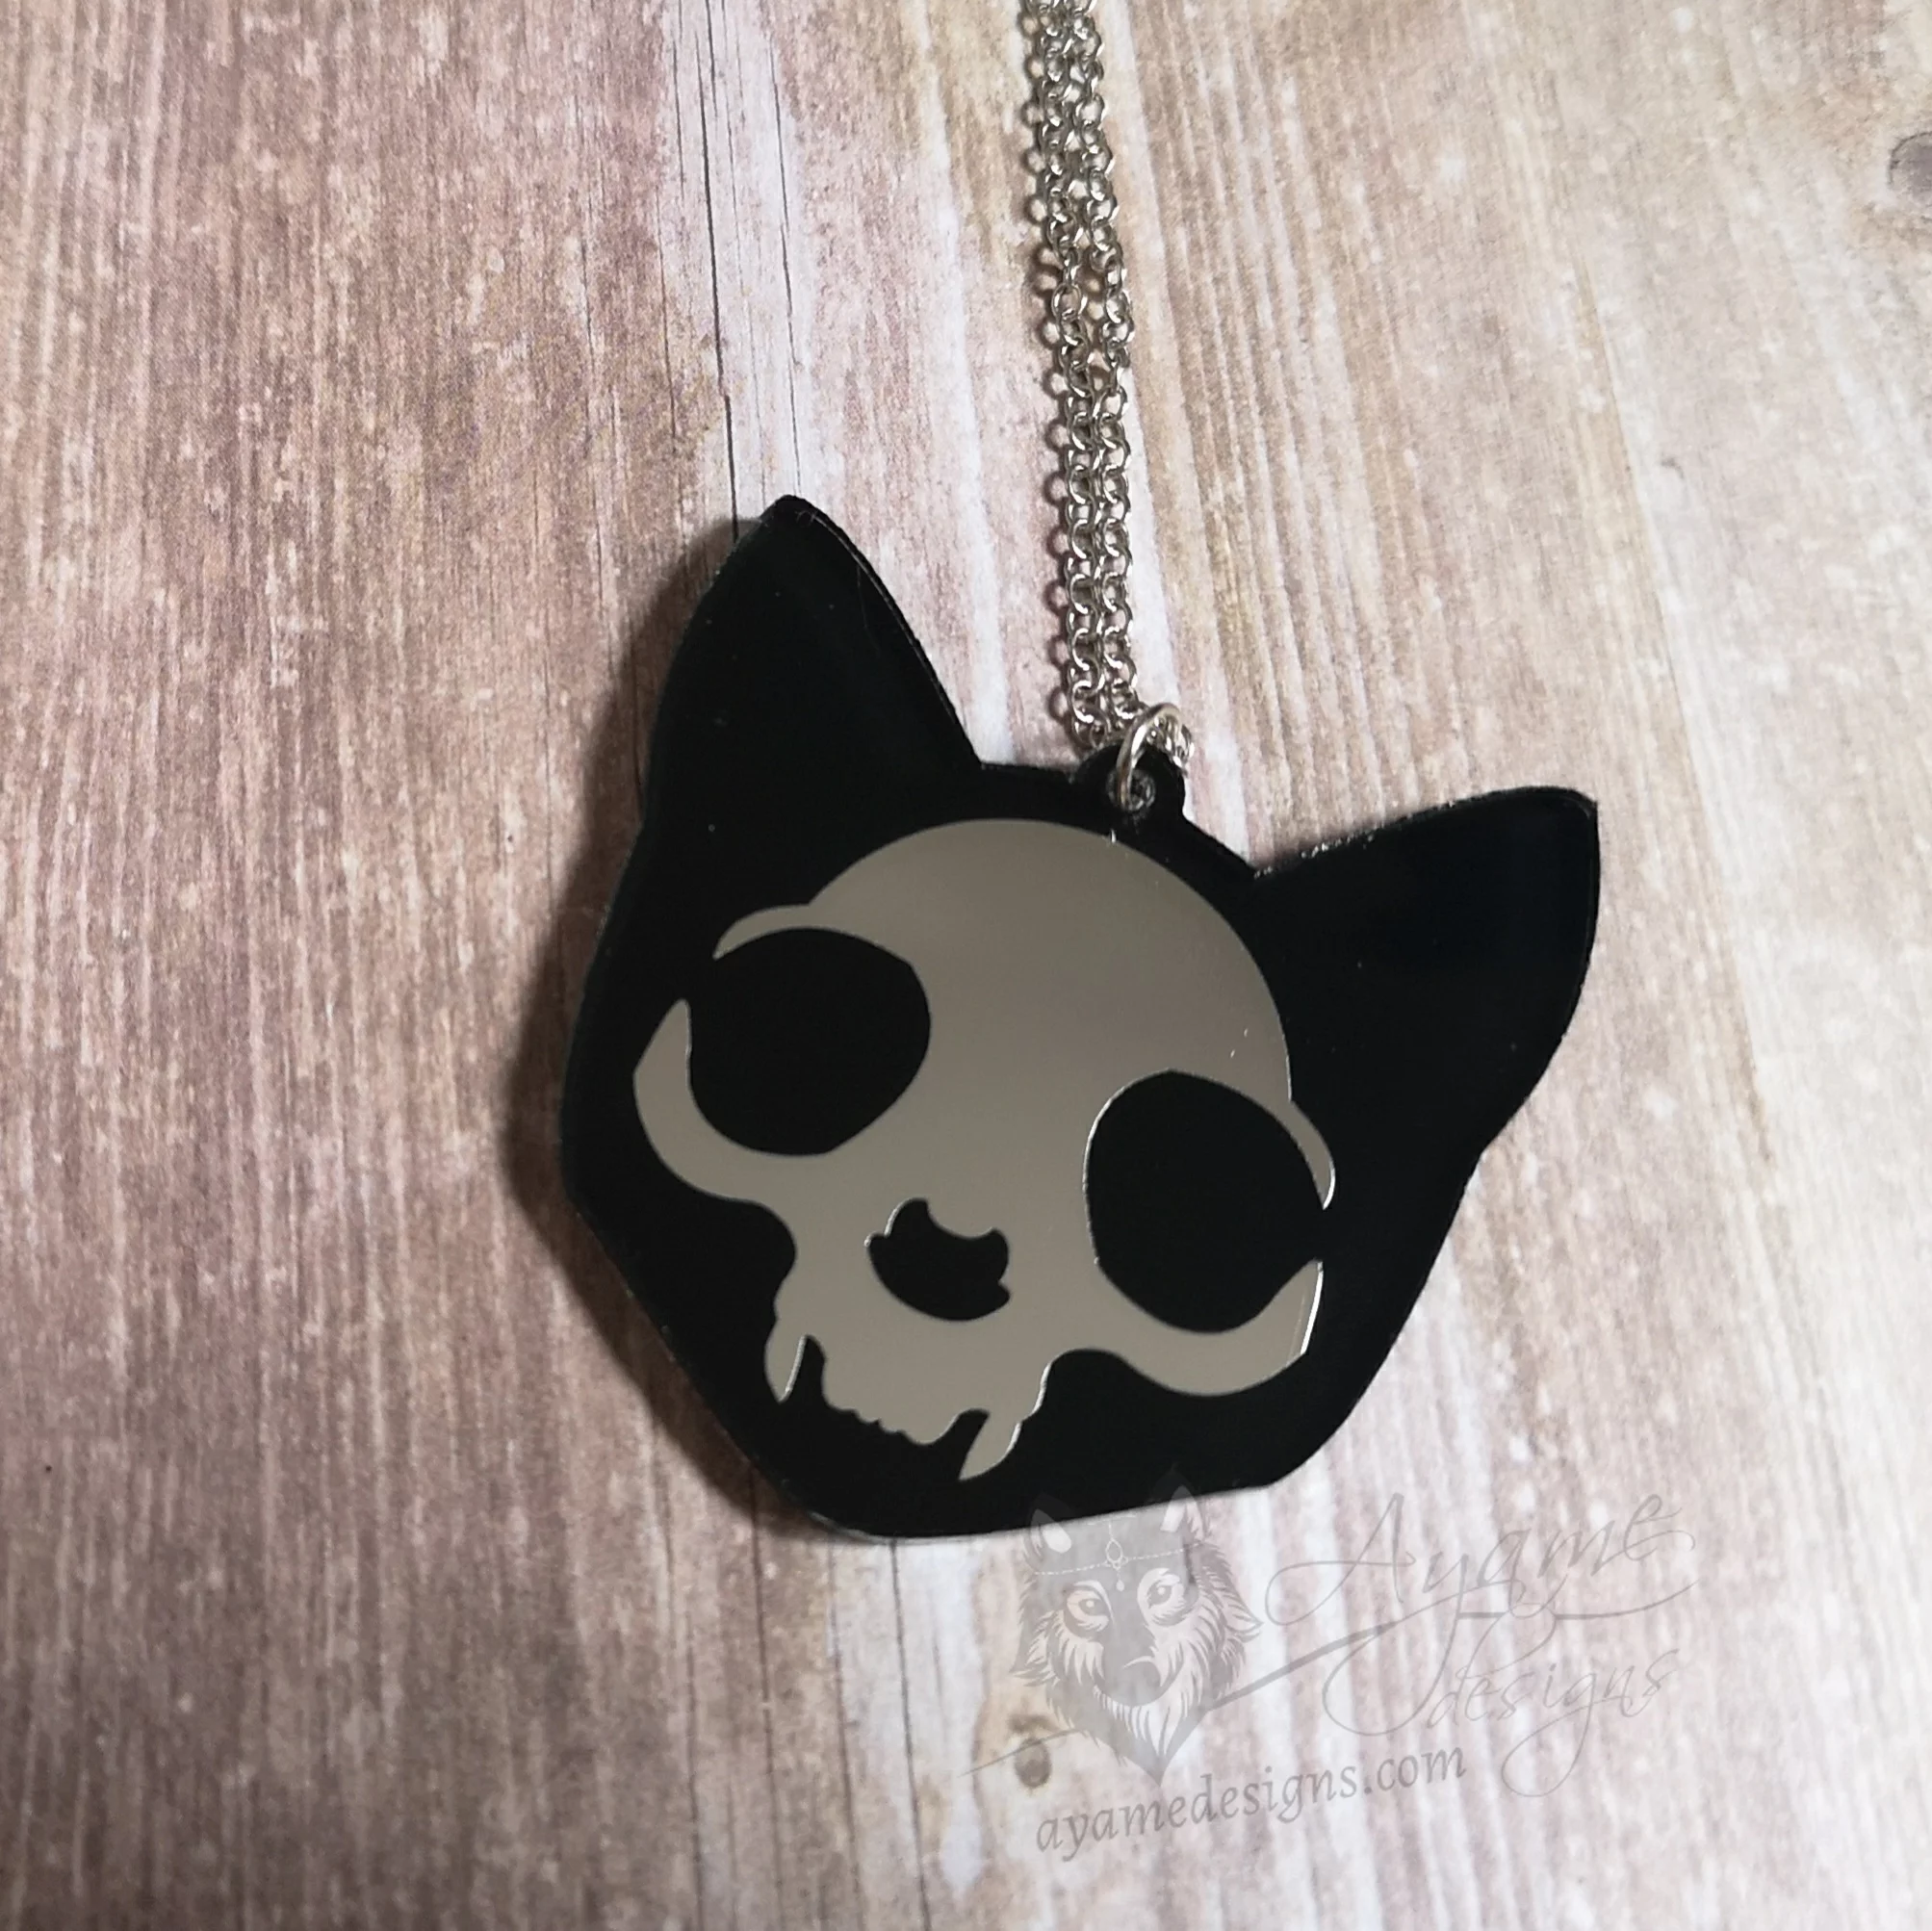 A laser cut mirror and resin cat skull pendant on a stainless steel adjustable chain